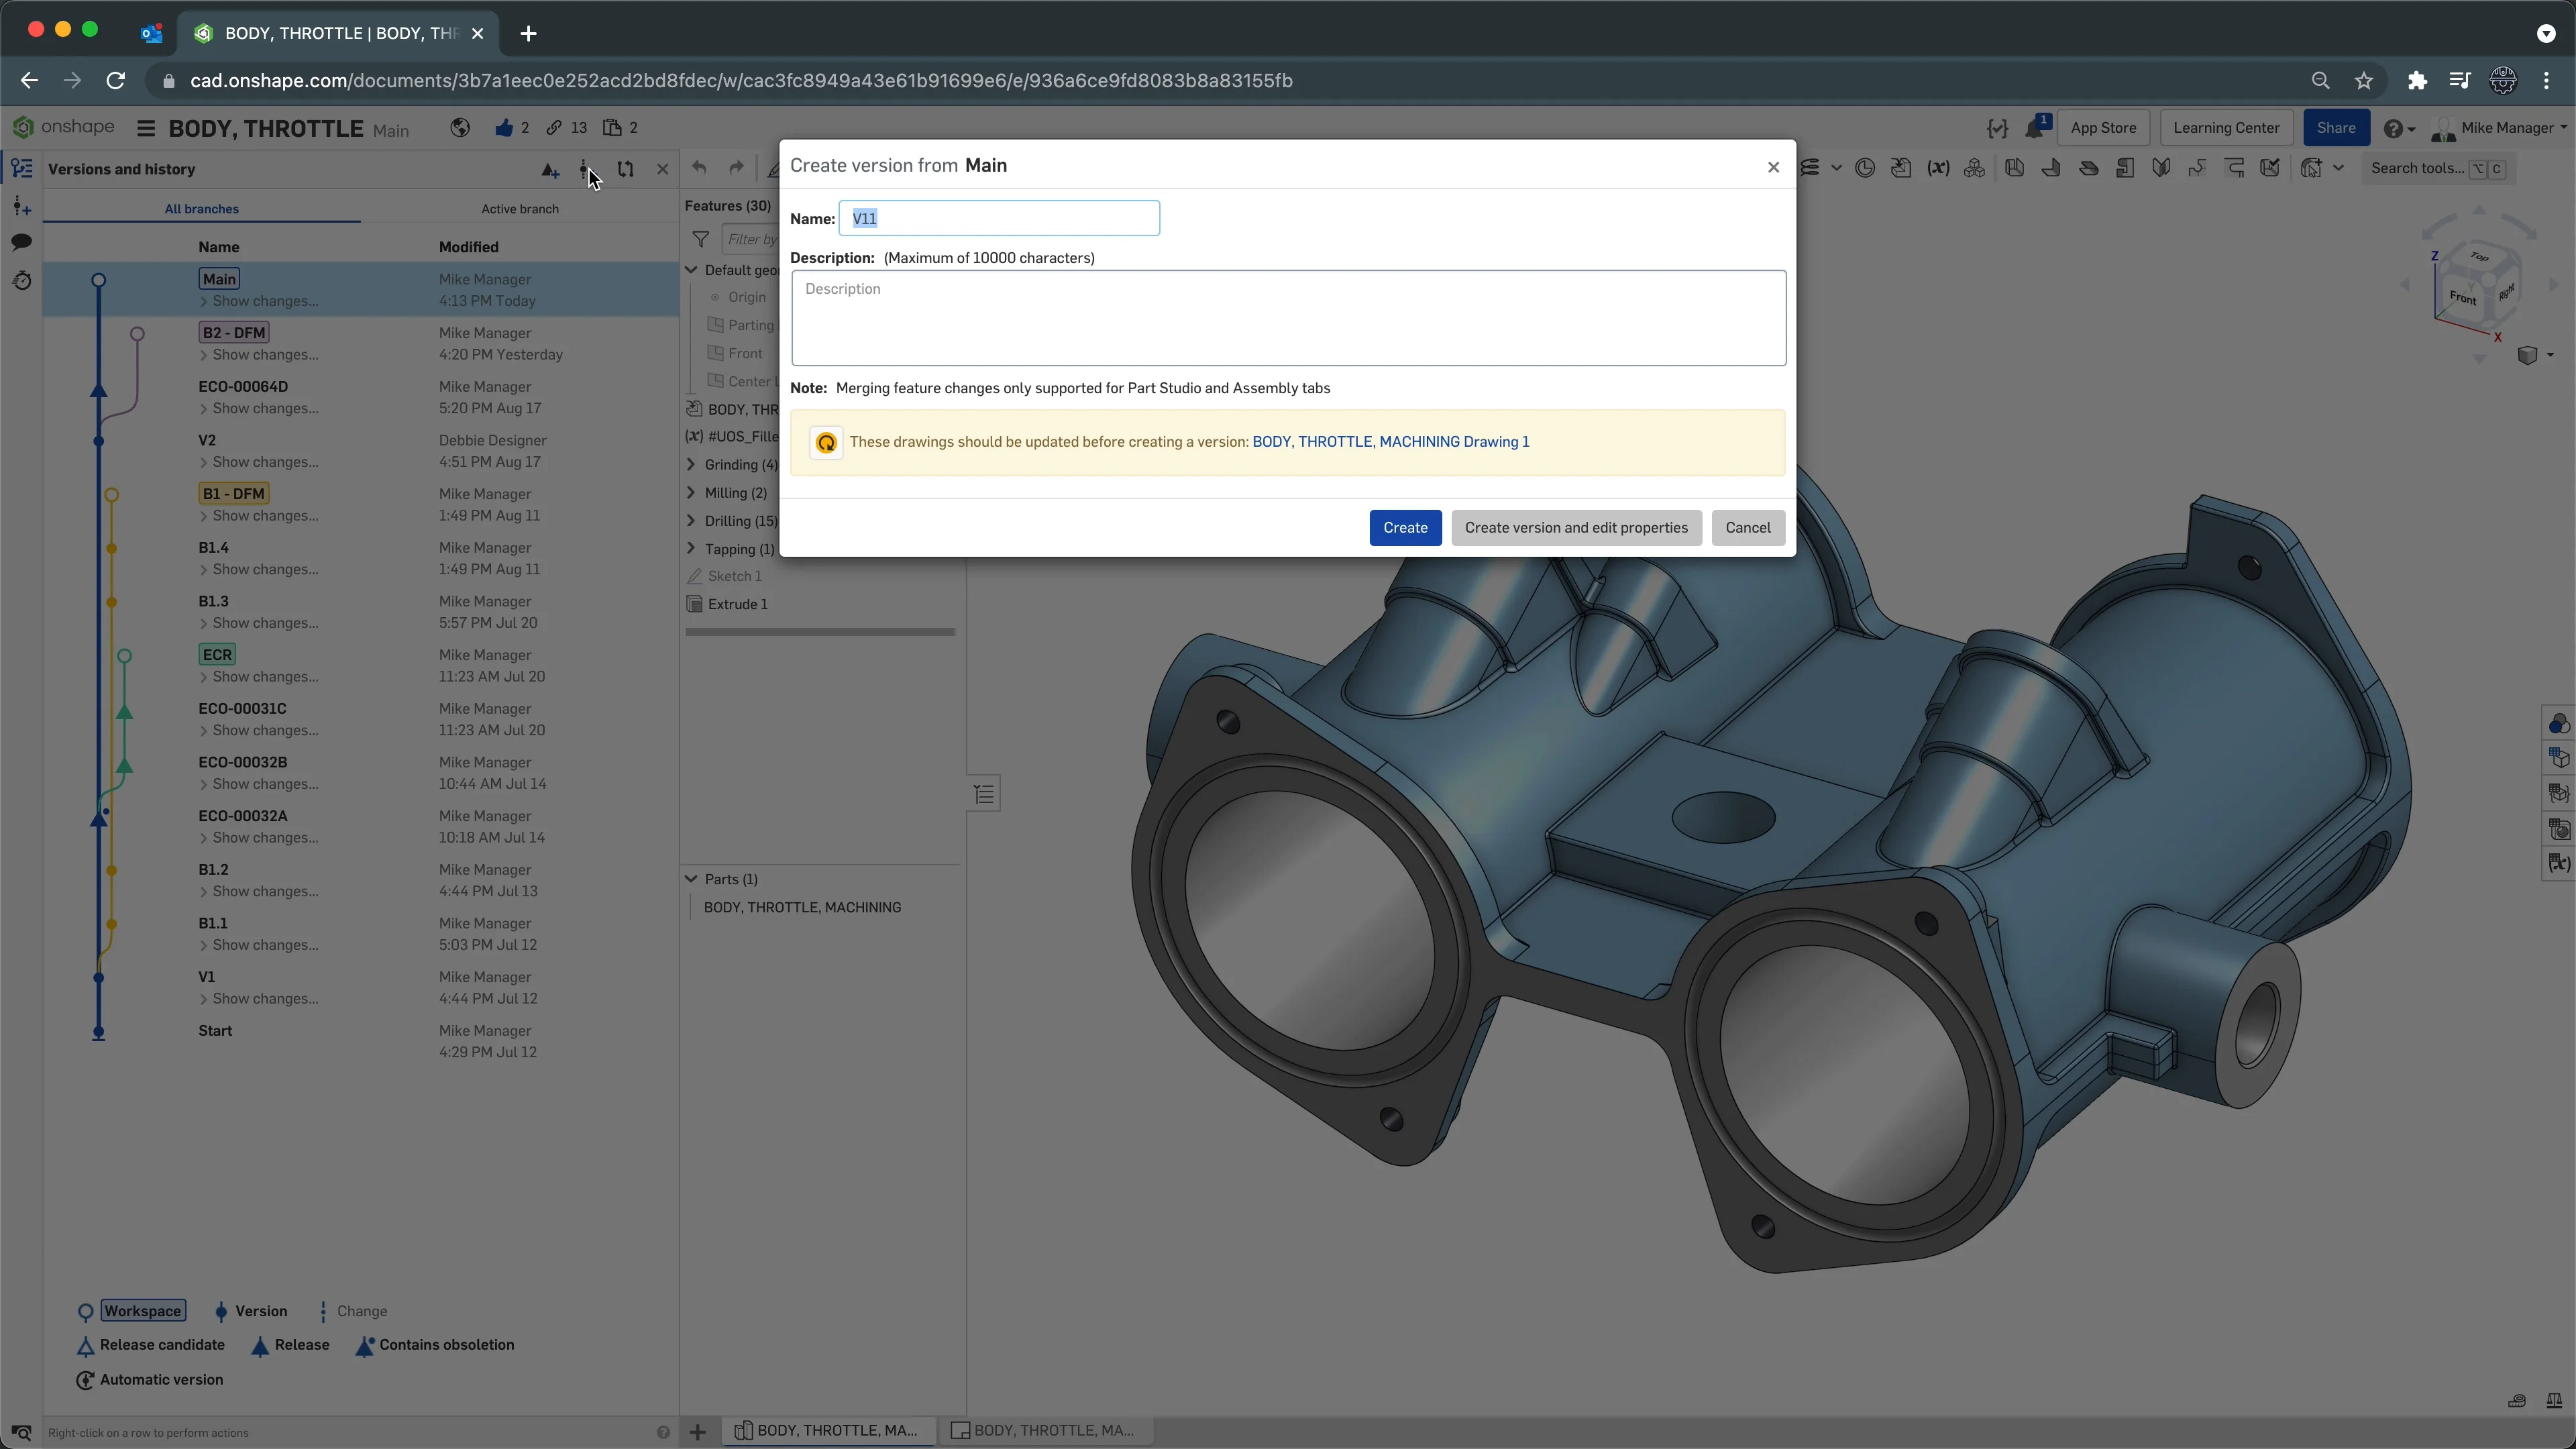 Working with Versions in Onshape